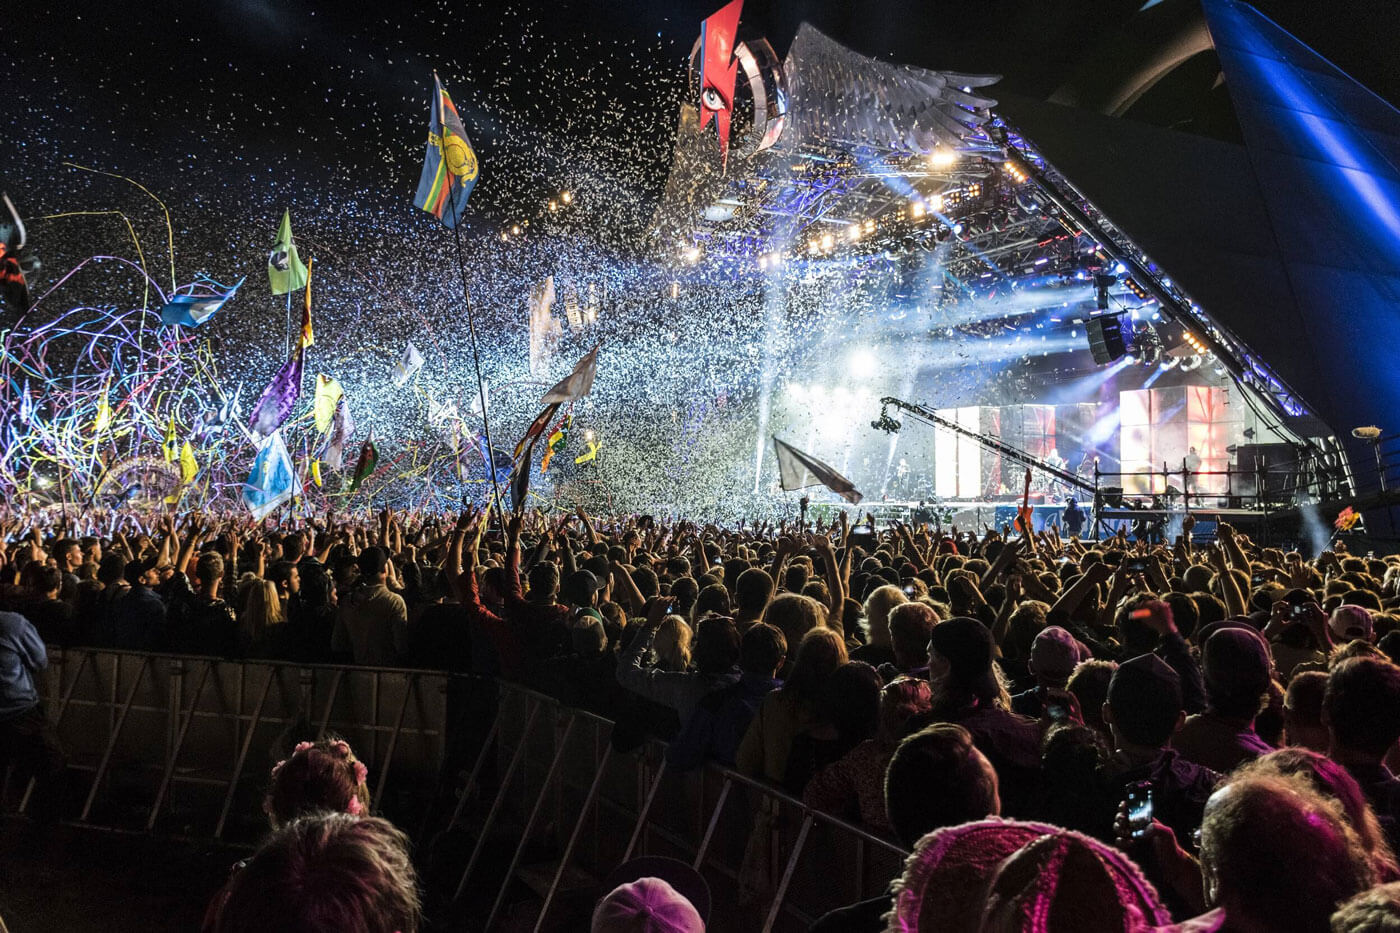 How to look after your hearing at Glastonbury | The Hearing Care Partnership